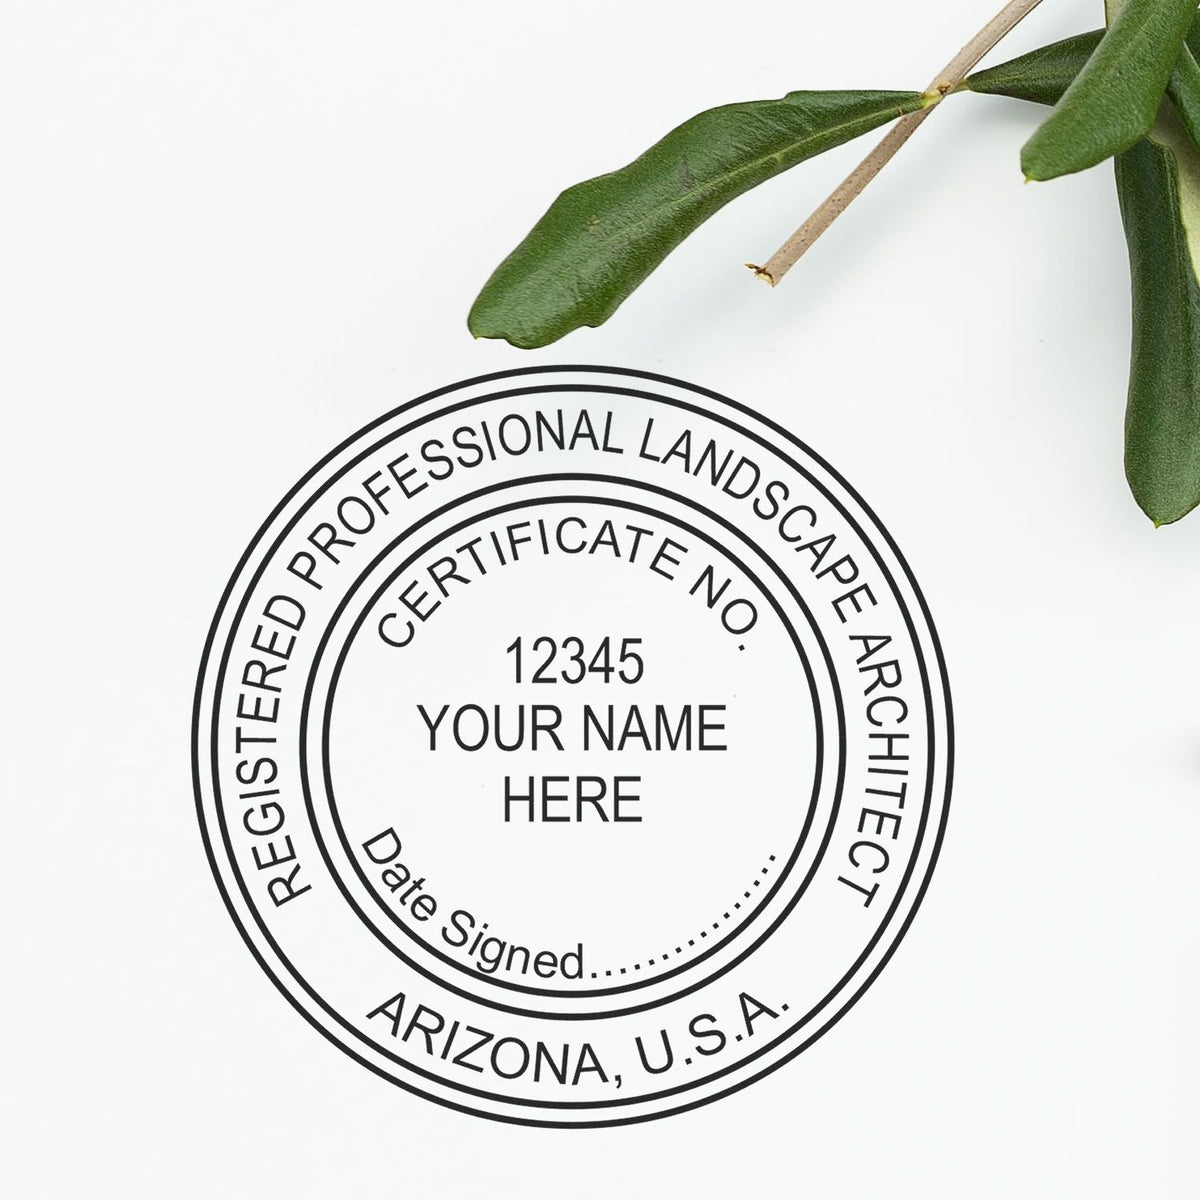 This paper is stamped with a sample imprint of the Slim Pre-Inked Arizona Landscape Architect Seal Stamp, signifying its quality and reliability.